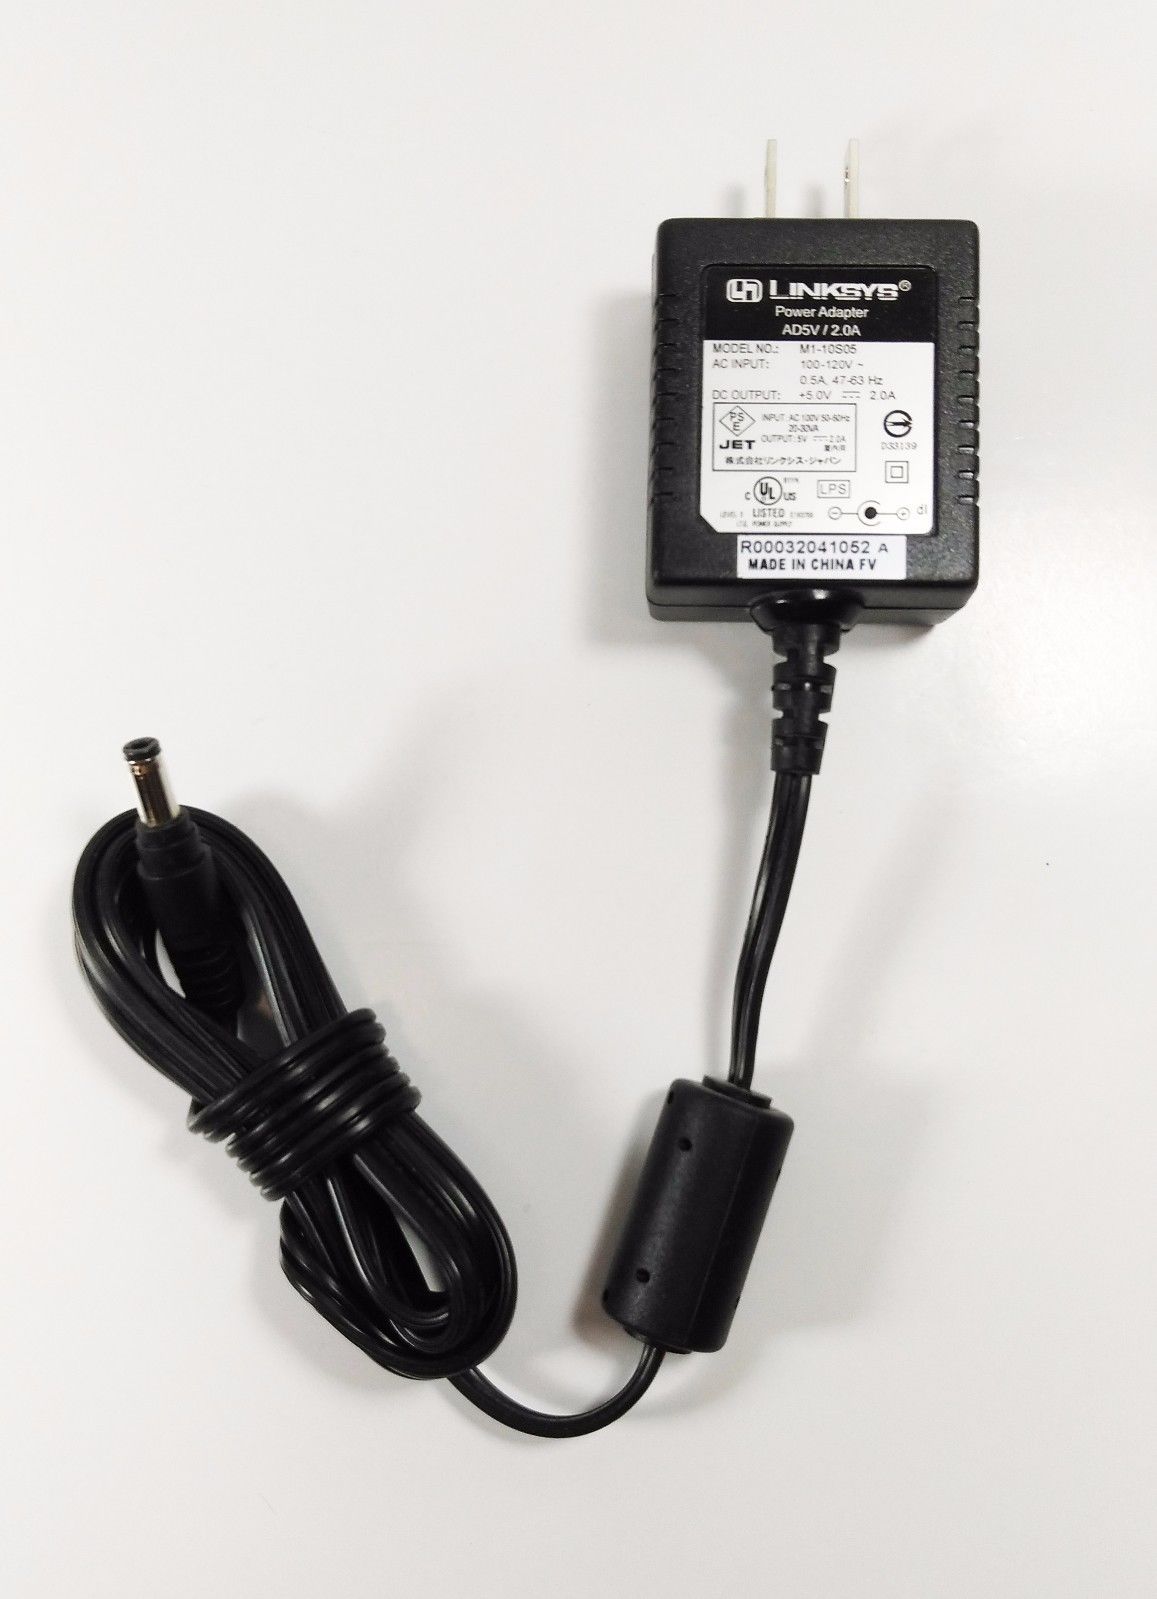 NEW 5V 2A Linksys M1-10S05 Power AC Adapter